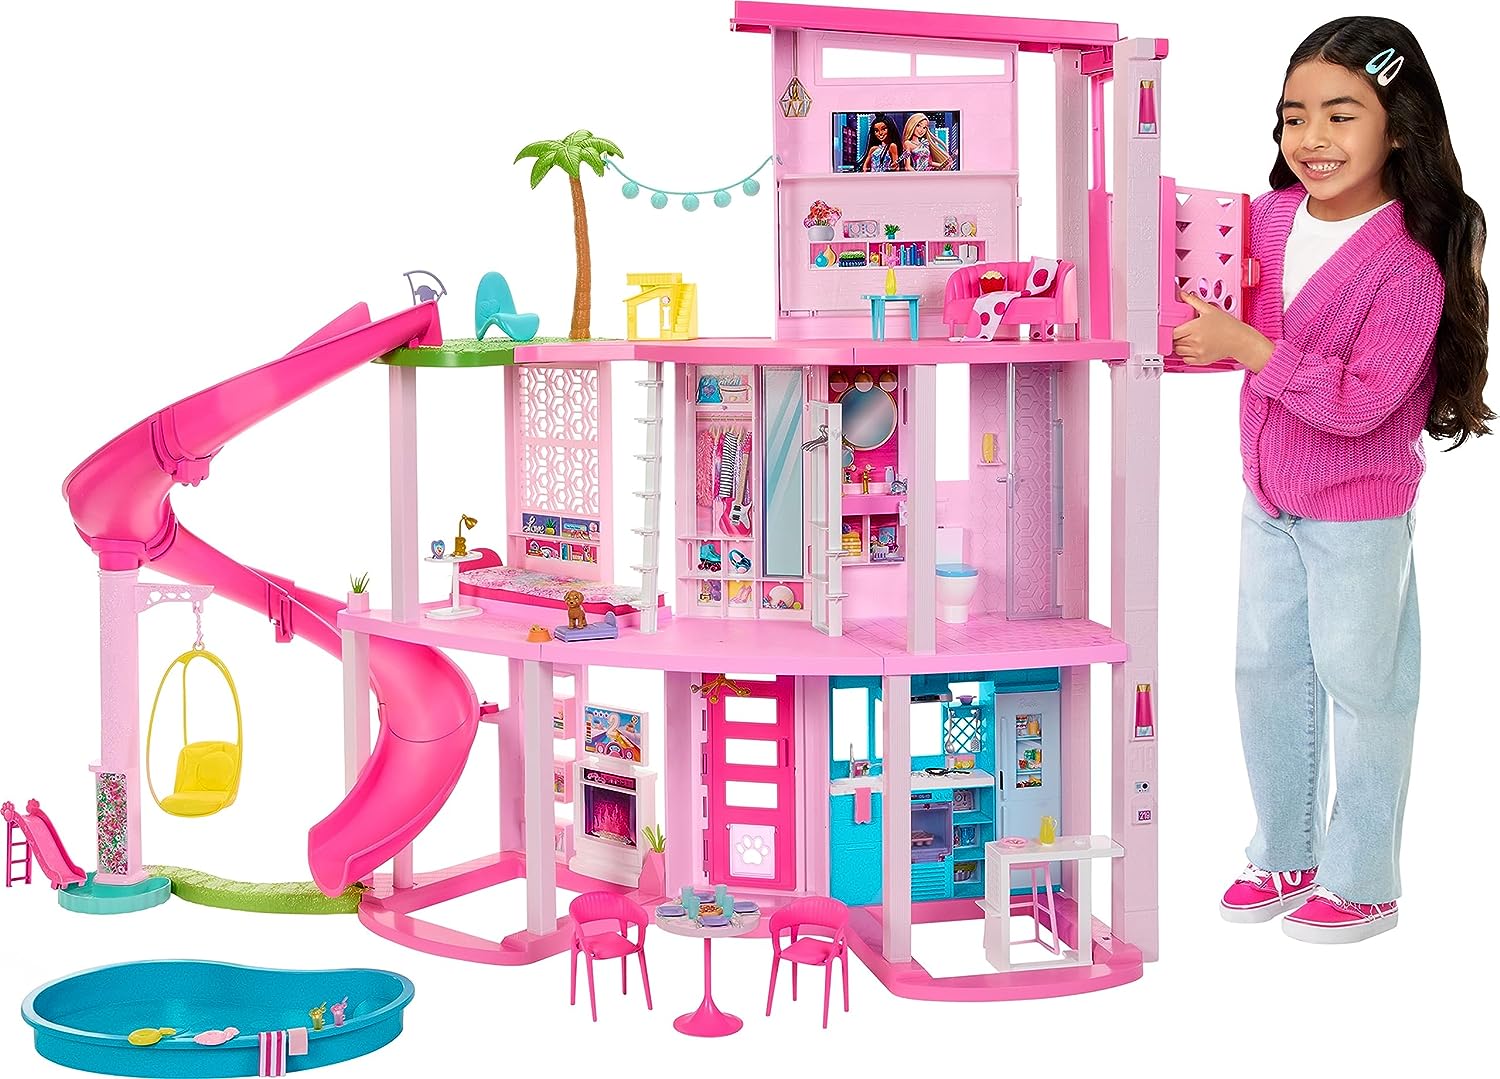 Barbie toy house